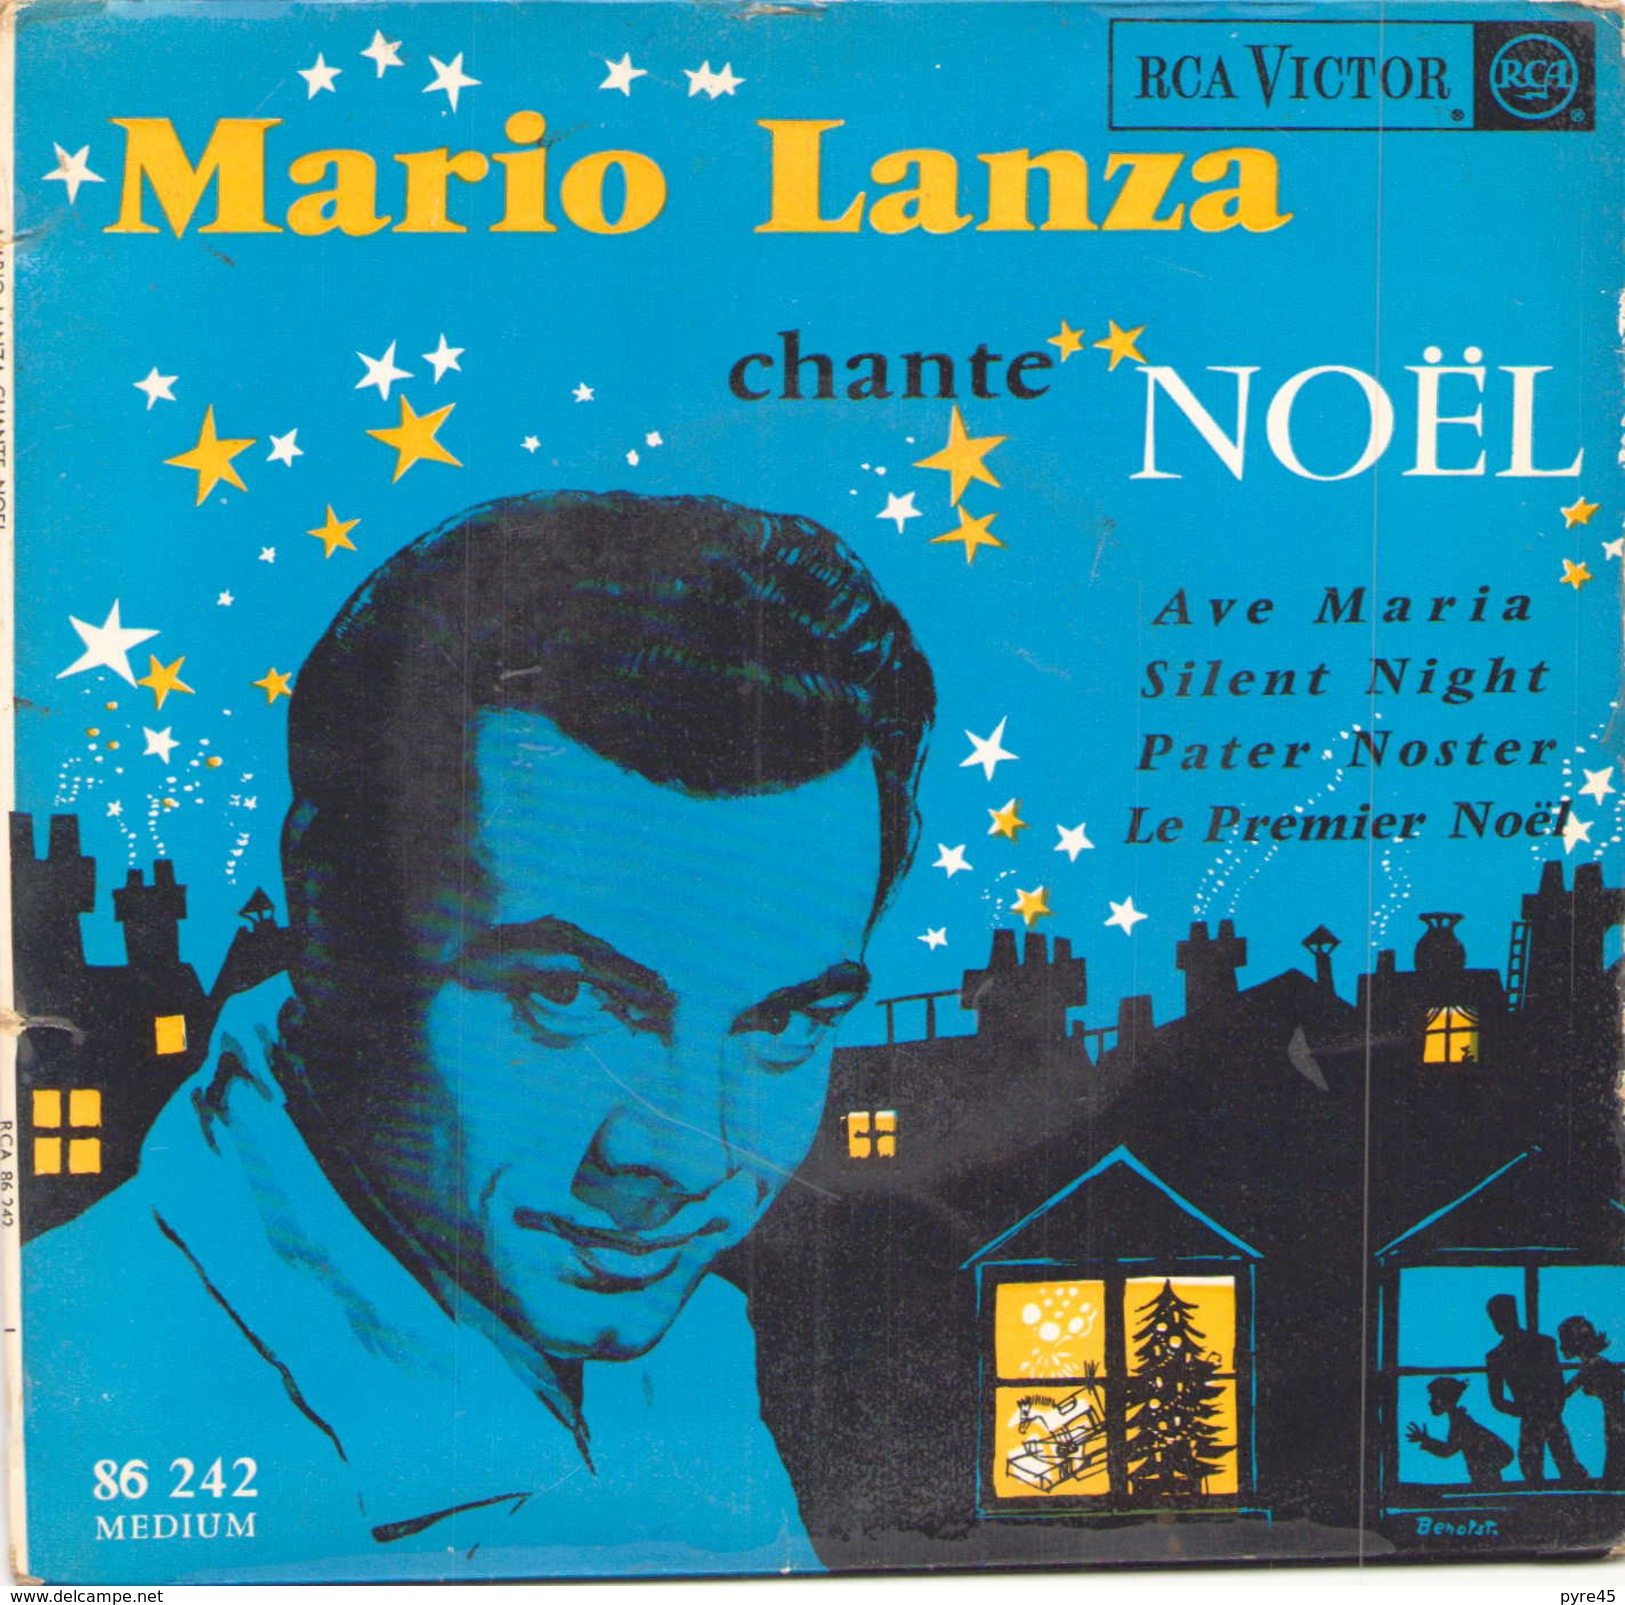 45 TOURS EP MARIO LANZA CHANTE NOEL AVE MARIA / SILENT NIGHT / PATER NOSTER / LE PREMIER NOEL RCA 86242 - Weihnachtslieder